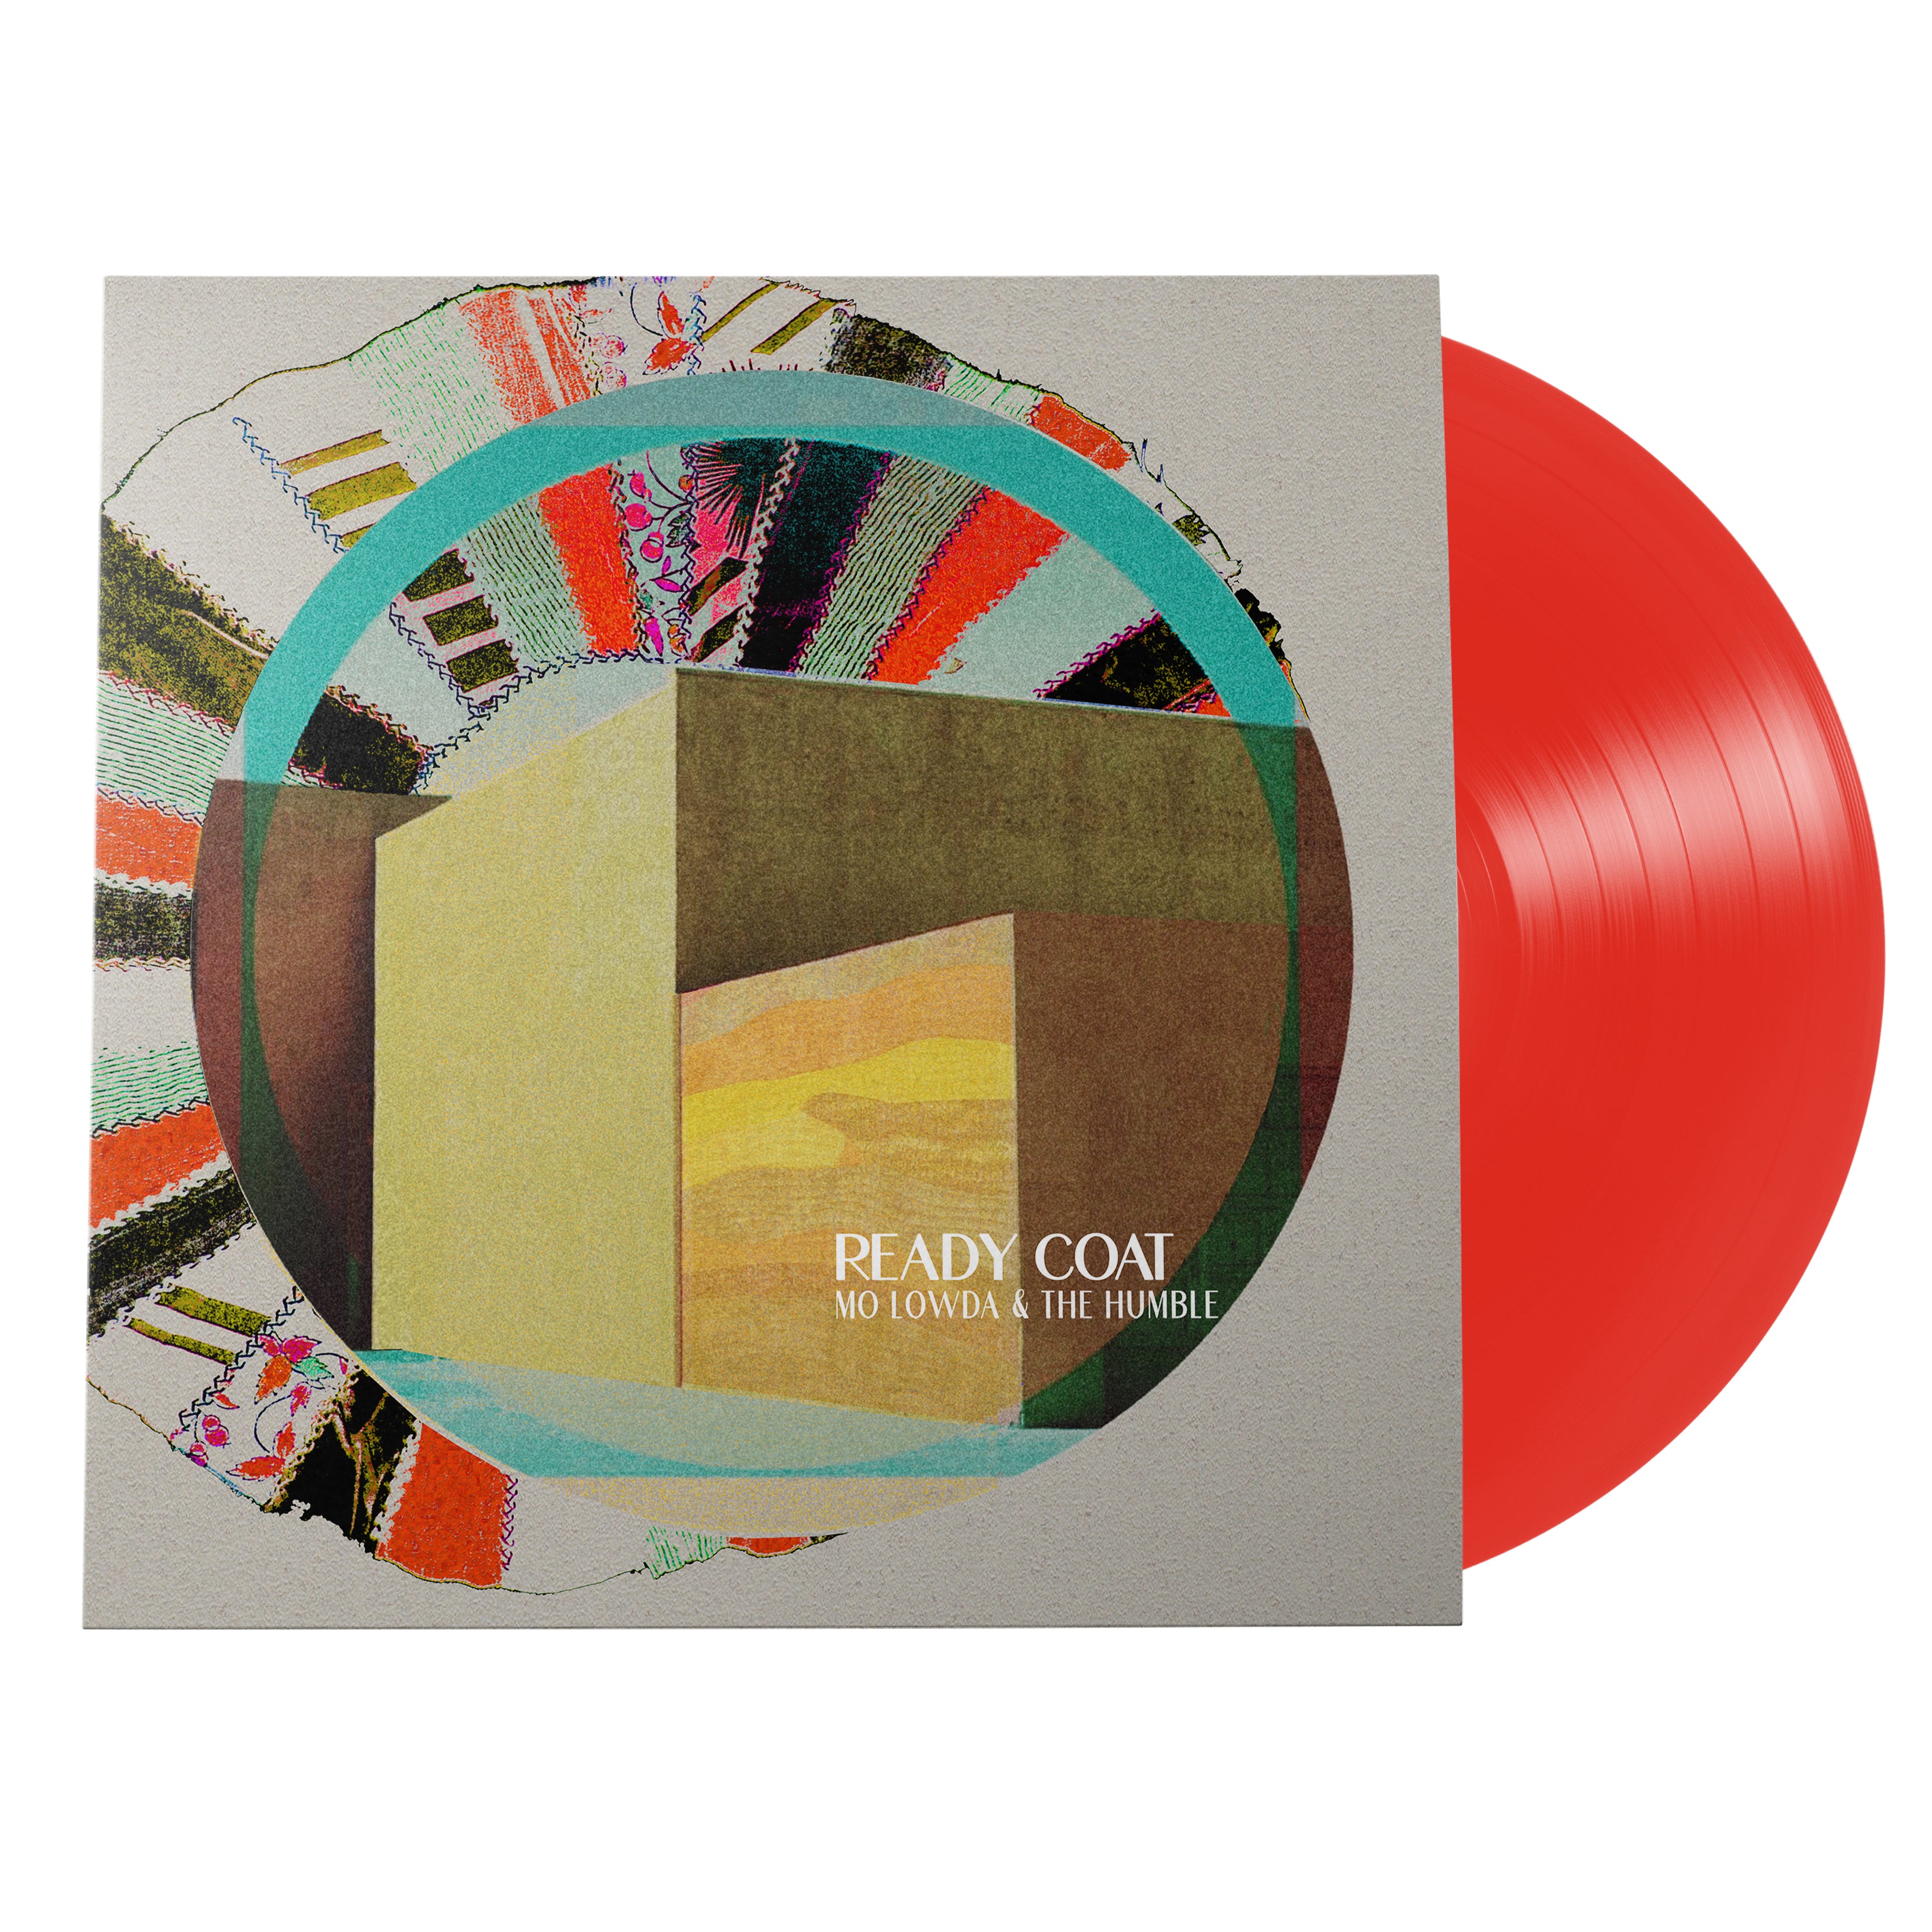 Mo Lowda & The Humble | Ready Coat (180 Gram Opaque Red | 100% Recyclable GVR Sound Injection Mold Pressing) | Vinyl